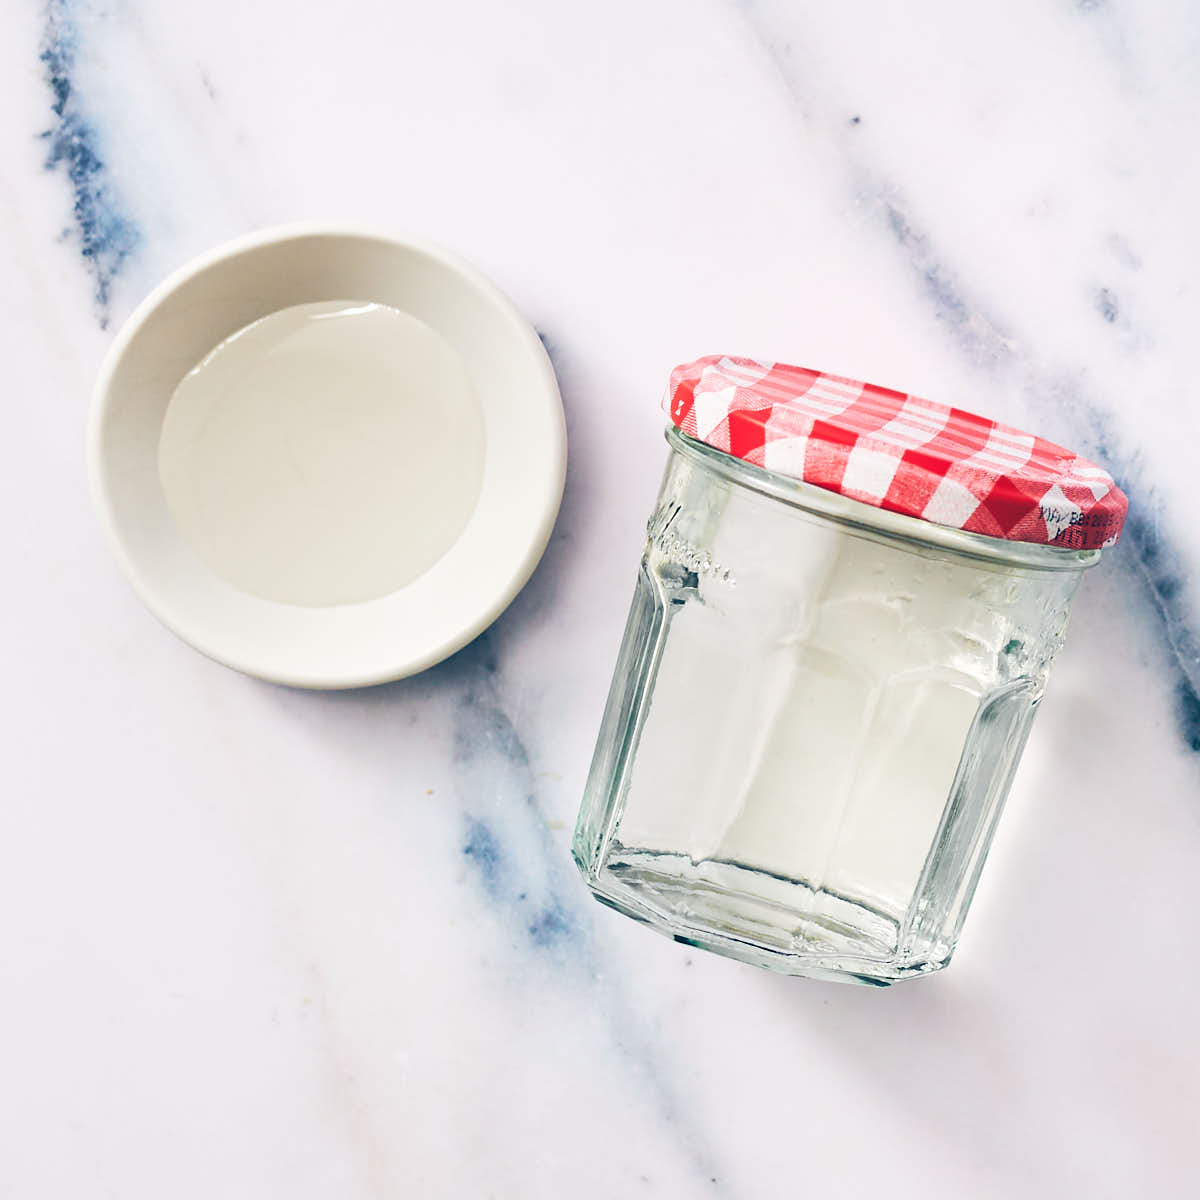 Simple syrup in a glass jar and bowl on marble counter.